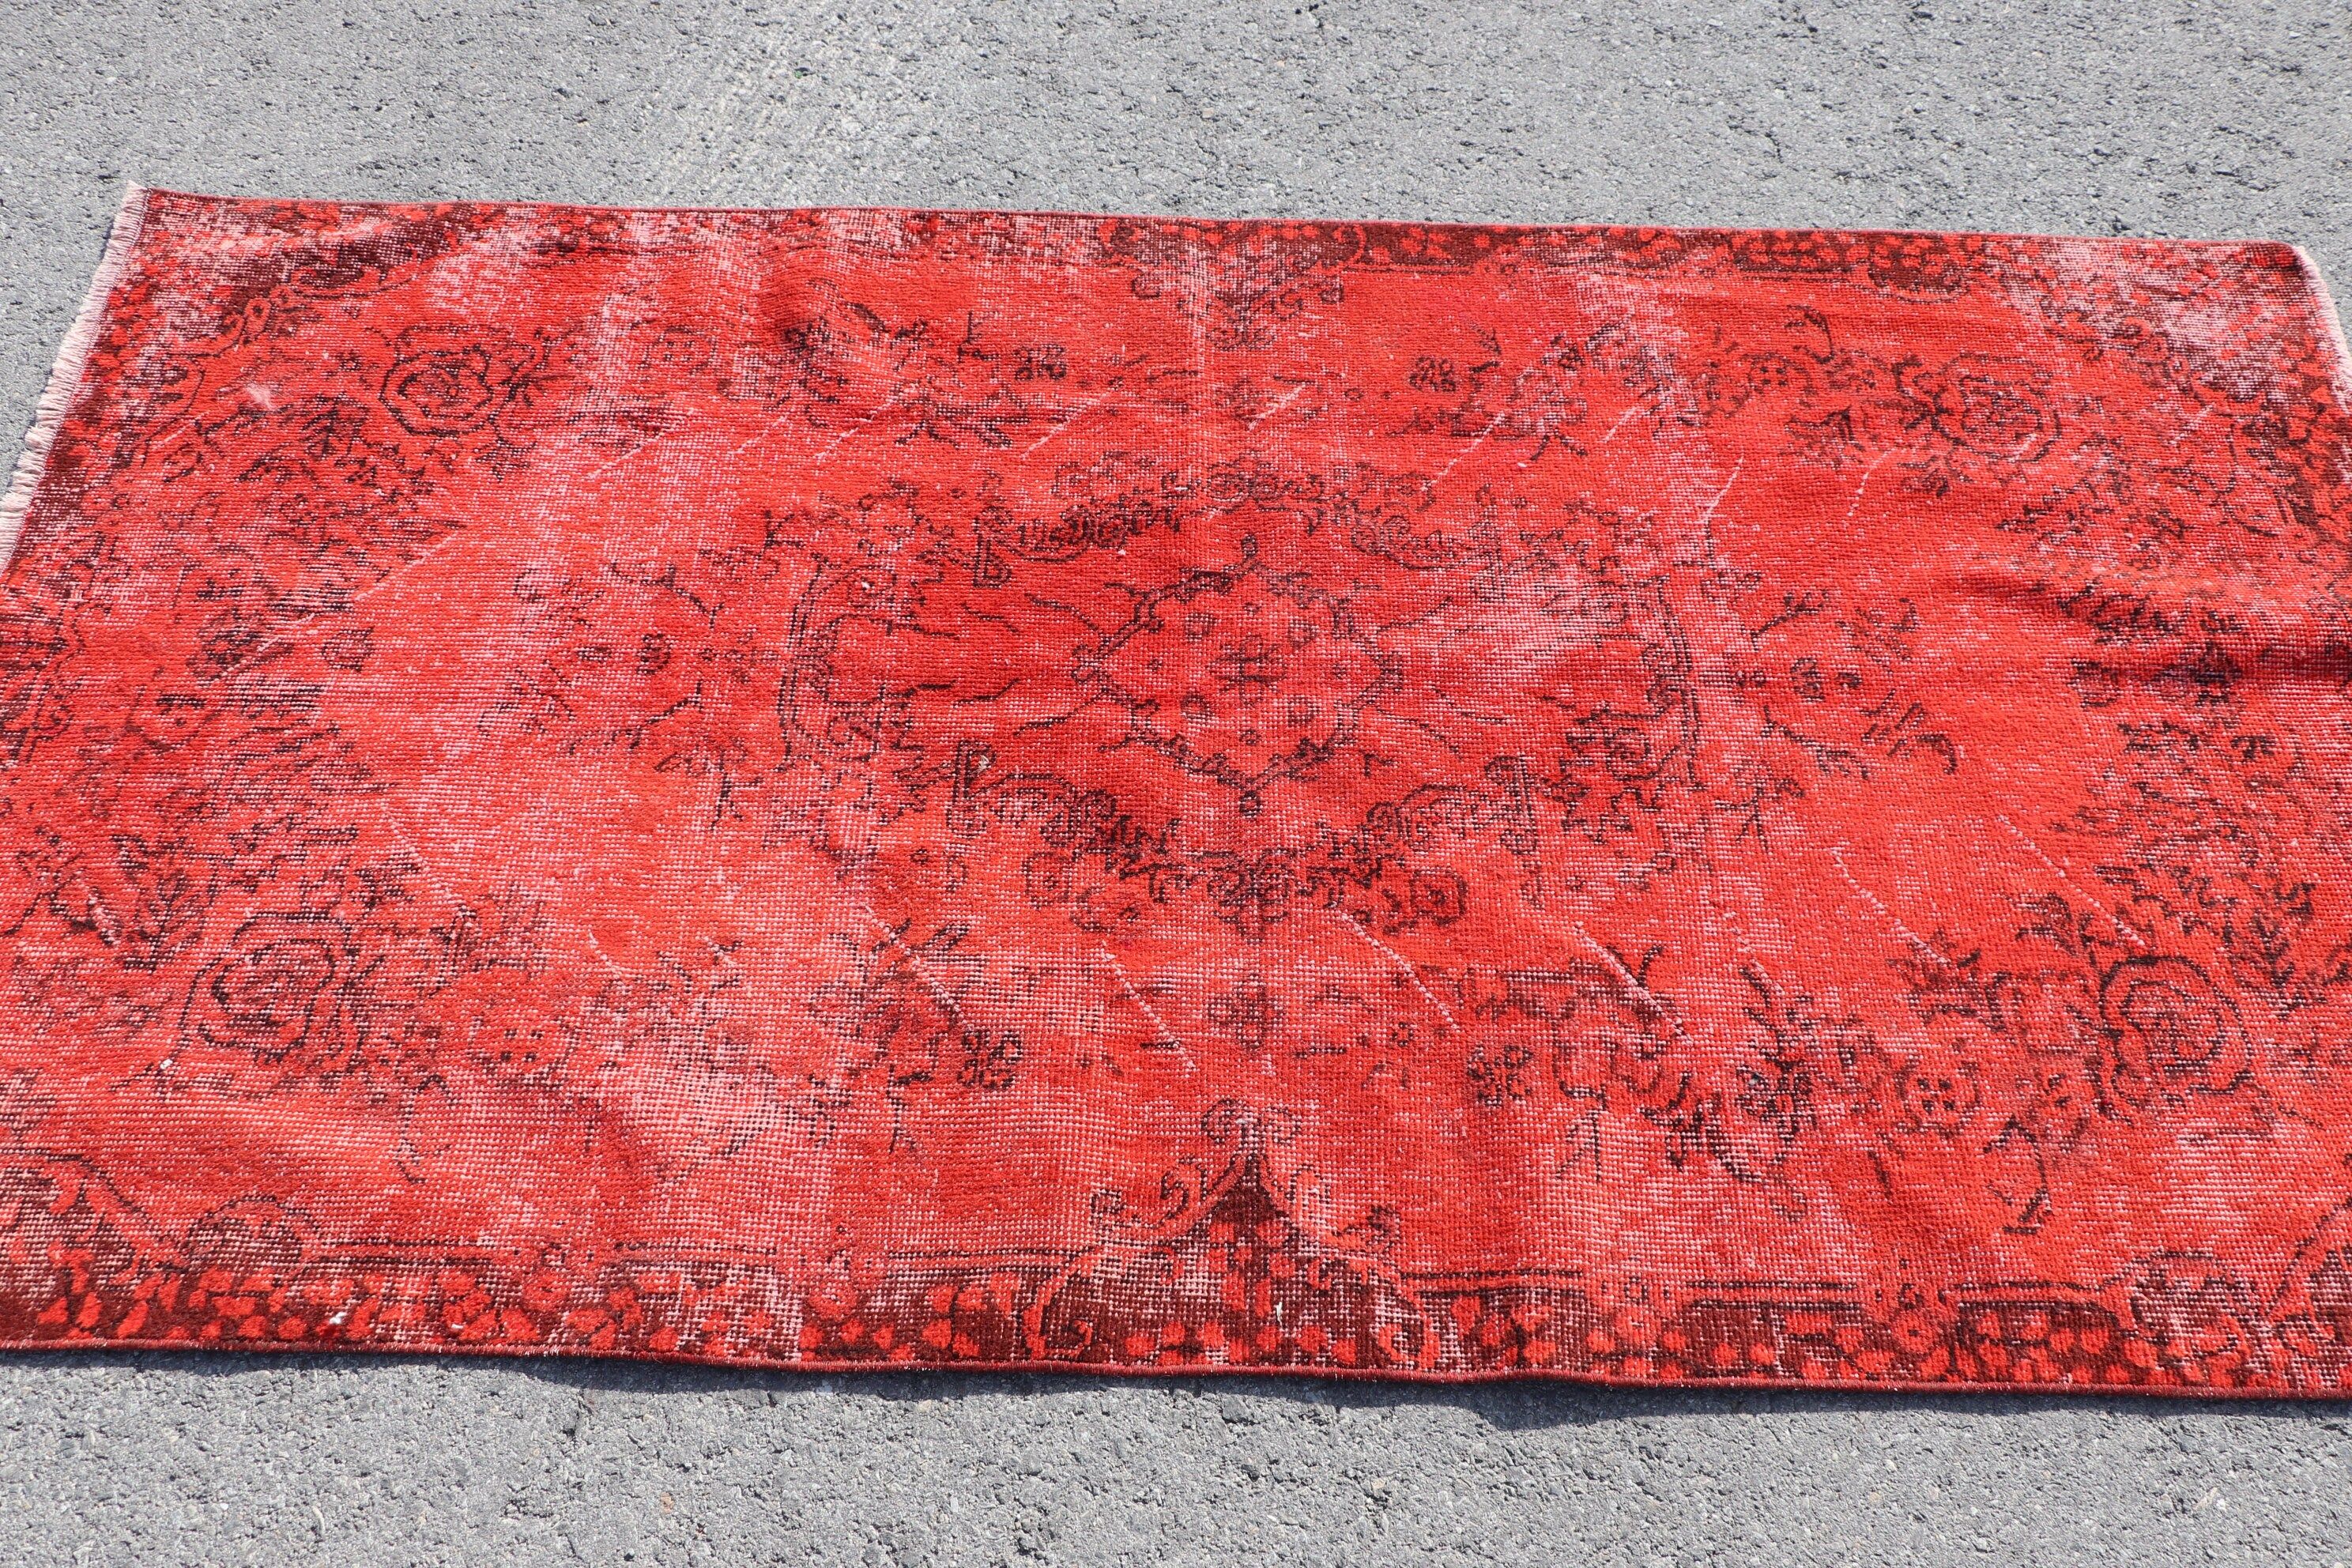 Dorm Rug, Bedroom Rug, Nursery Rugs, Vintage Rugs, Rugs for Kitchen, Red Kitchen Rugs, Anatolian Rug, 3.6x6.6 ft Accent Rug, Turkish Rug